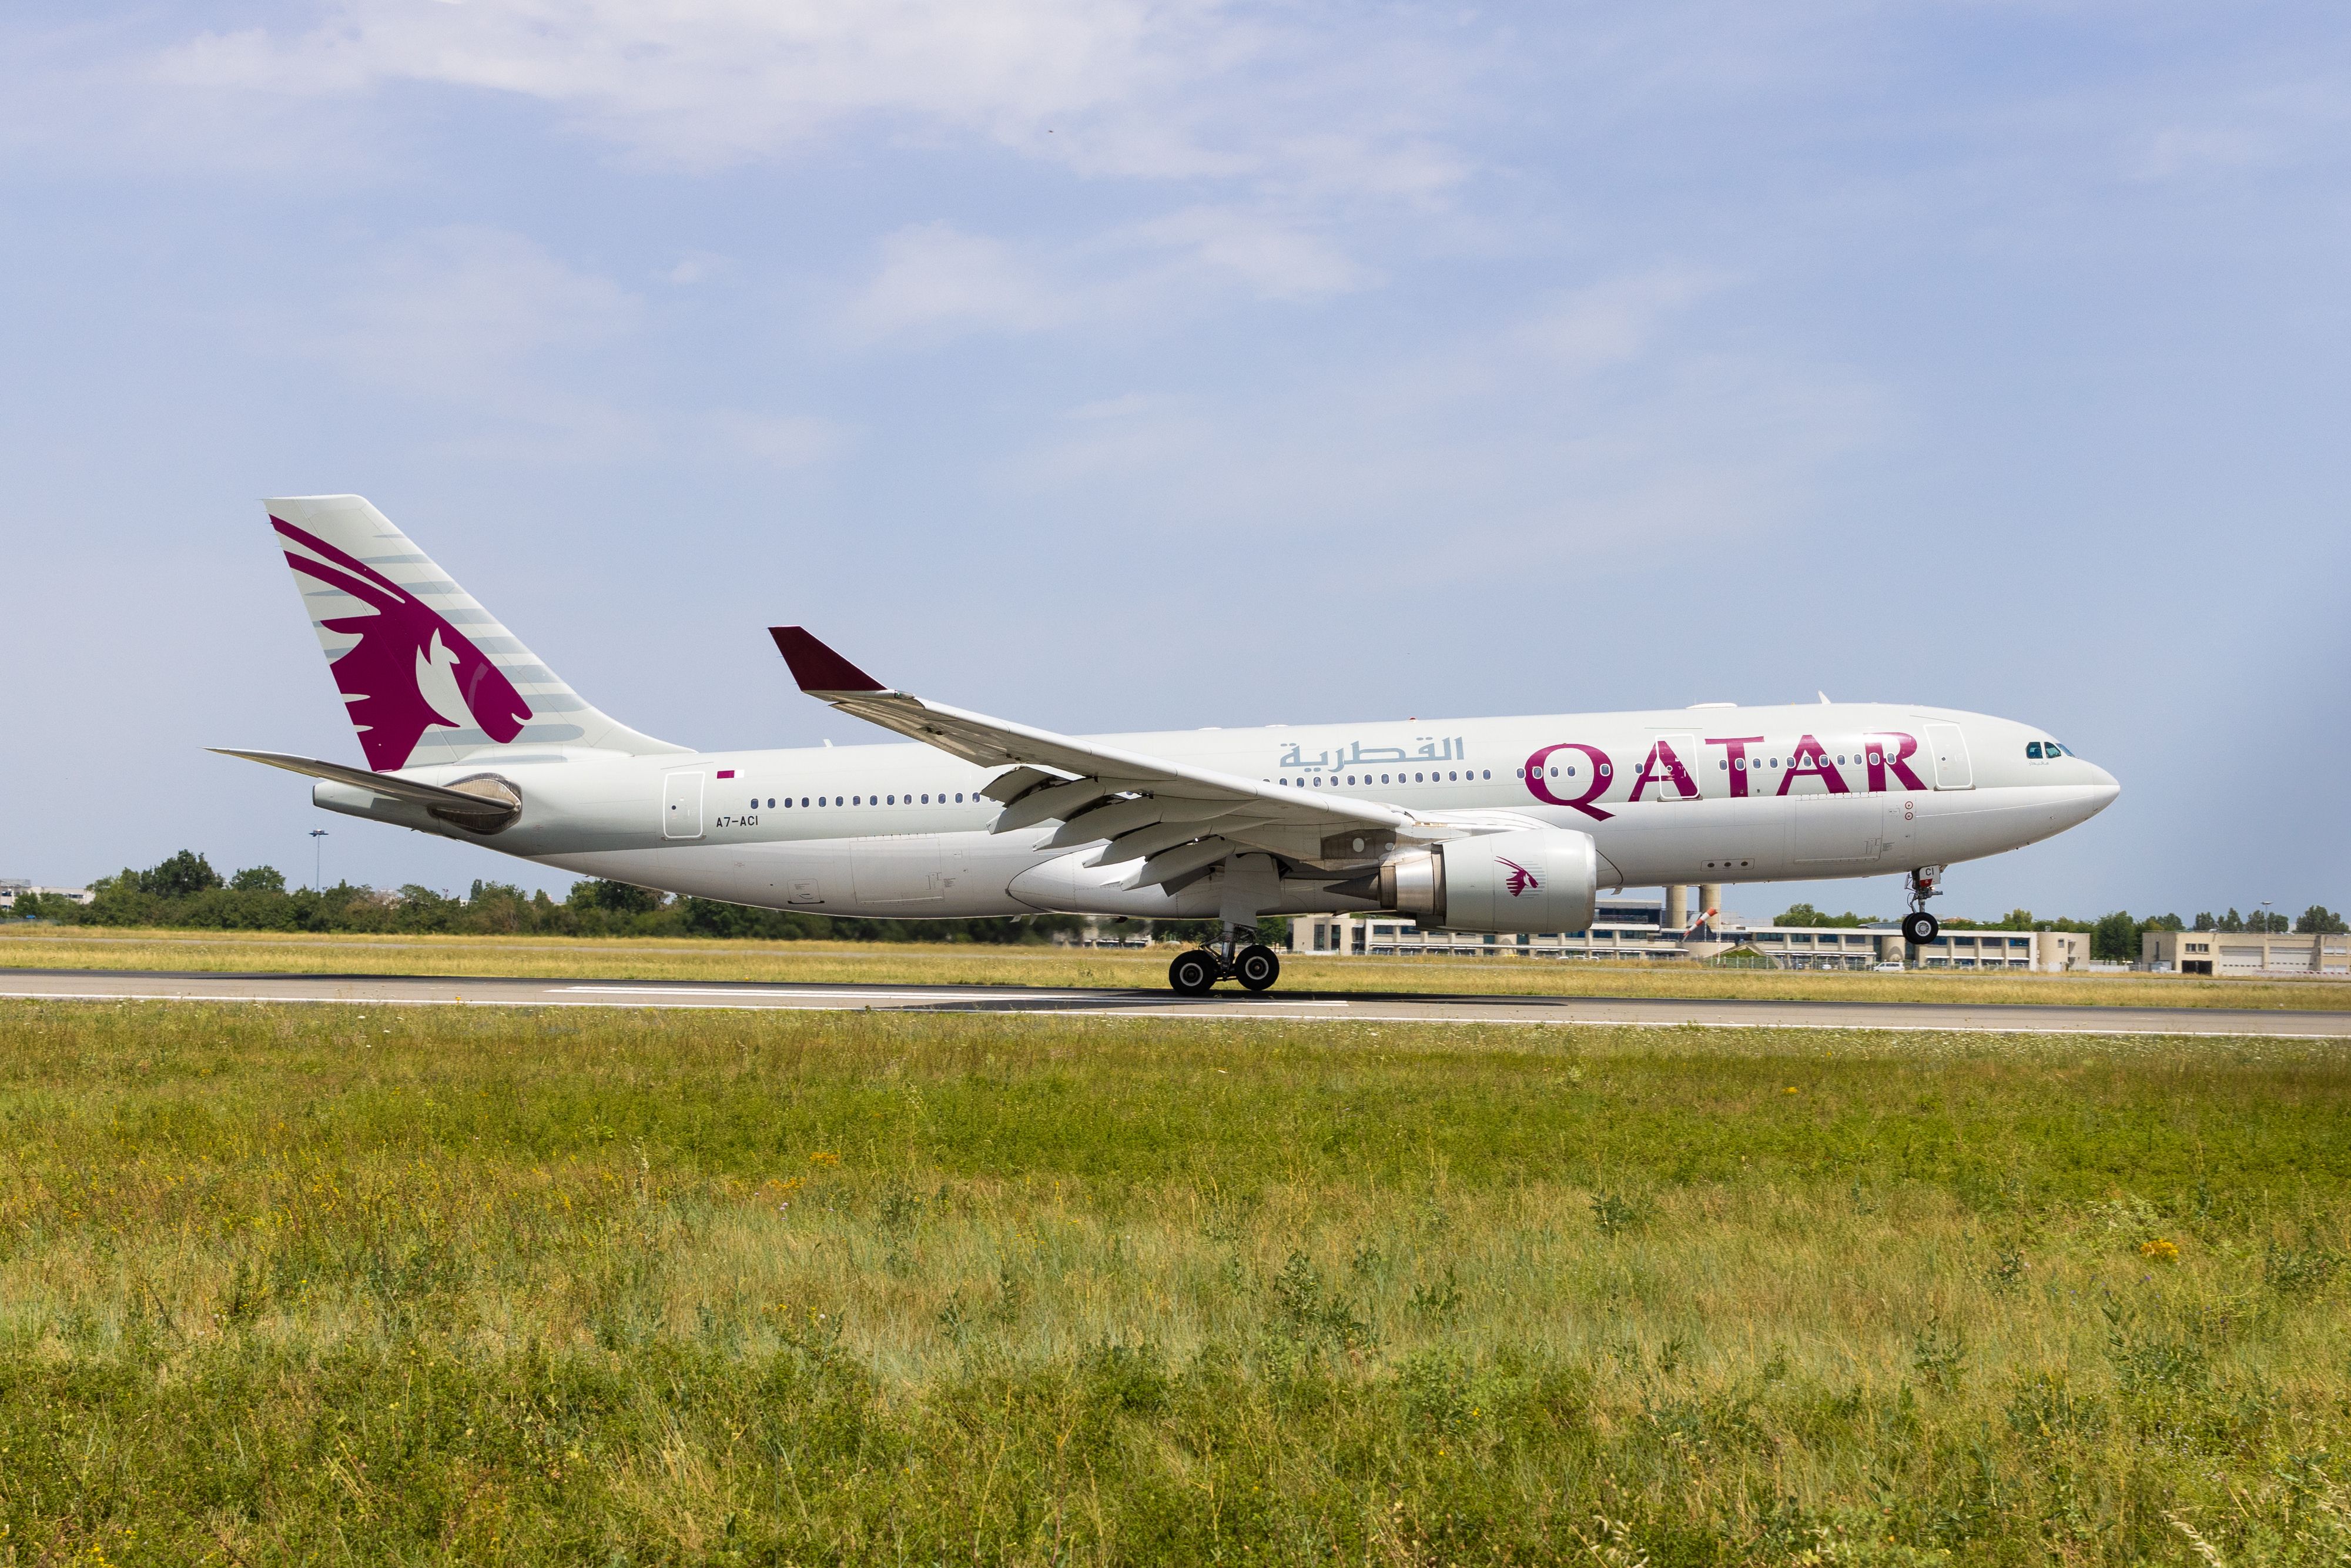 Qatar Airways Launches A330 Flights To Airbus’ Toulouse Home